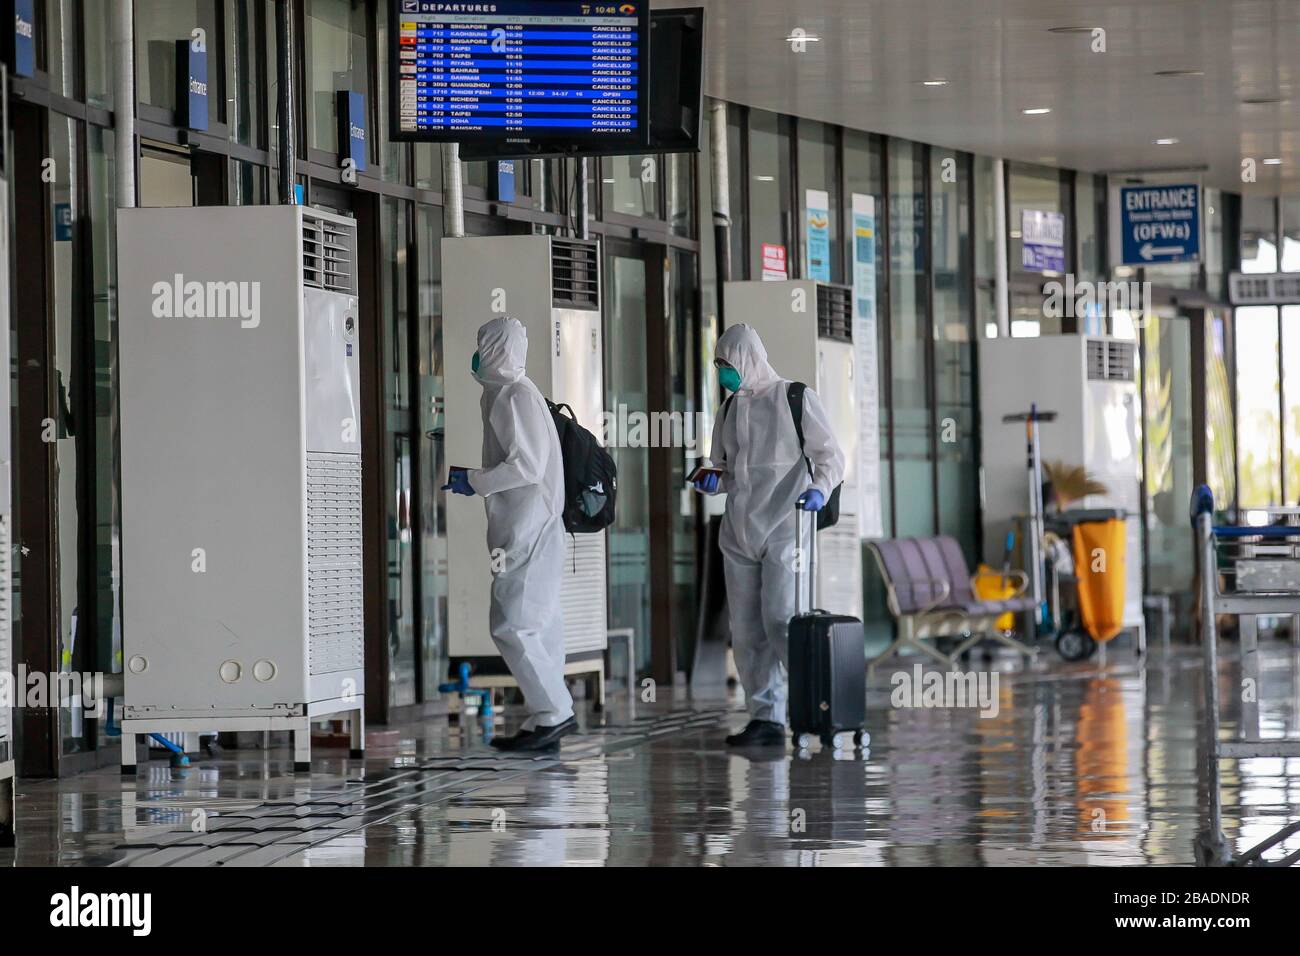 Pasay City. 27th Mar, 2020. Passengers wearing face masks and protective suits arrive for their flight at Ninoy Aquino International Airport (NAIA) in Pasay City, the Philippines on March 27, 2020. Credit: Rouelle Umali/Xinhua/Alamy Live News Stock Photo